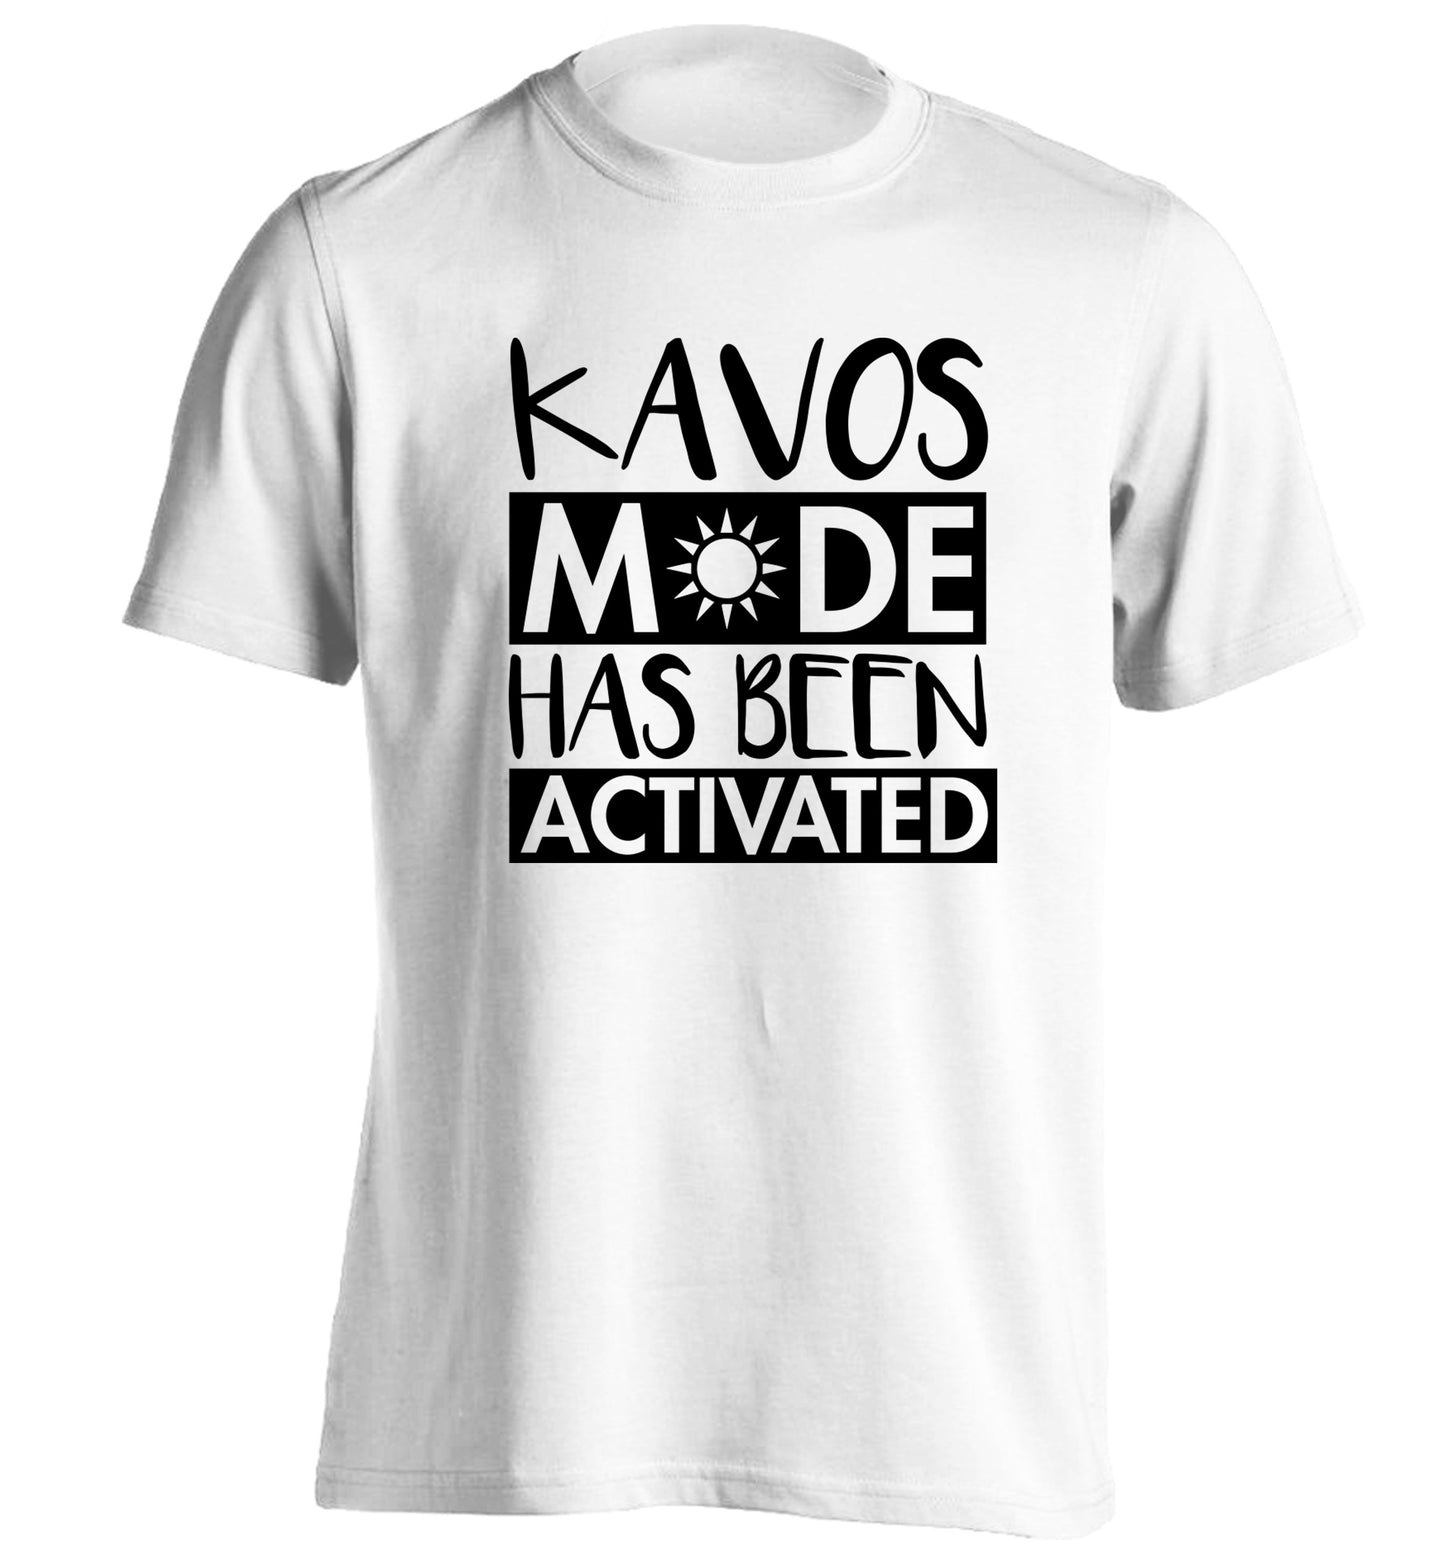 Kavos mode has been activated adults unisex white Tshirt 2XL